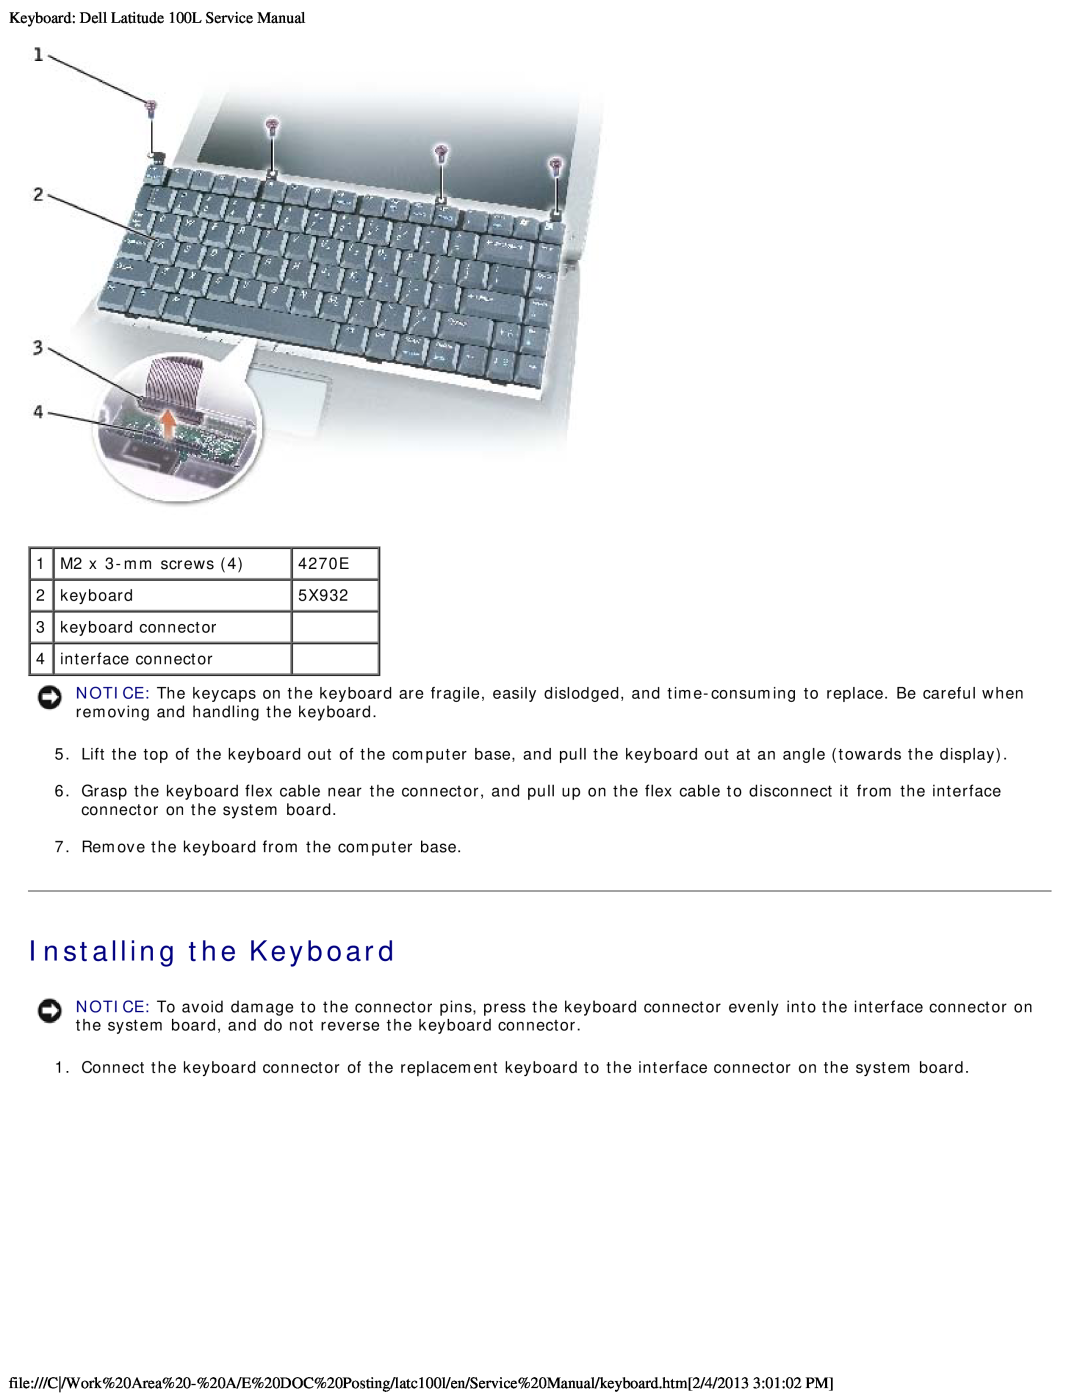 Dell service manual Installing the Keyboard, Keyboard Dell Latitude 100L Service Manual 